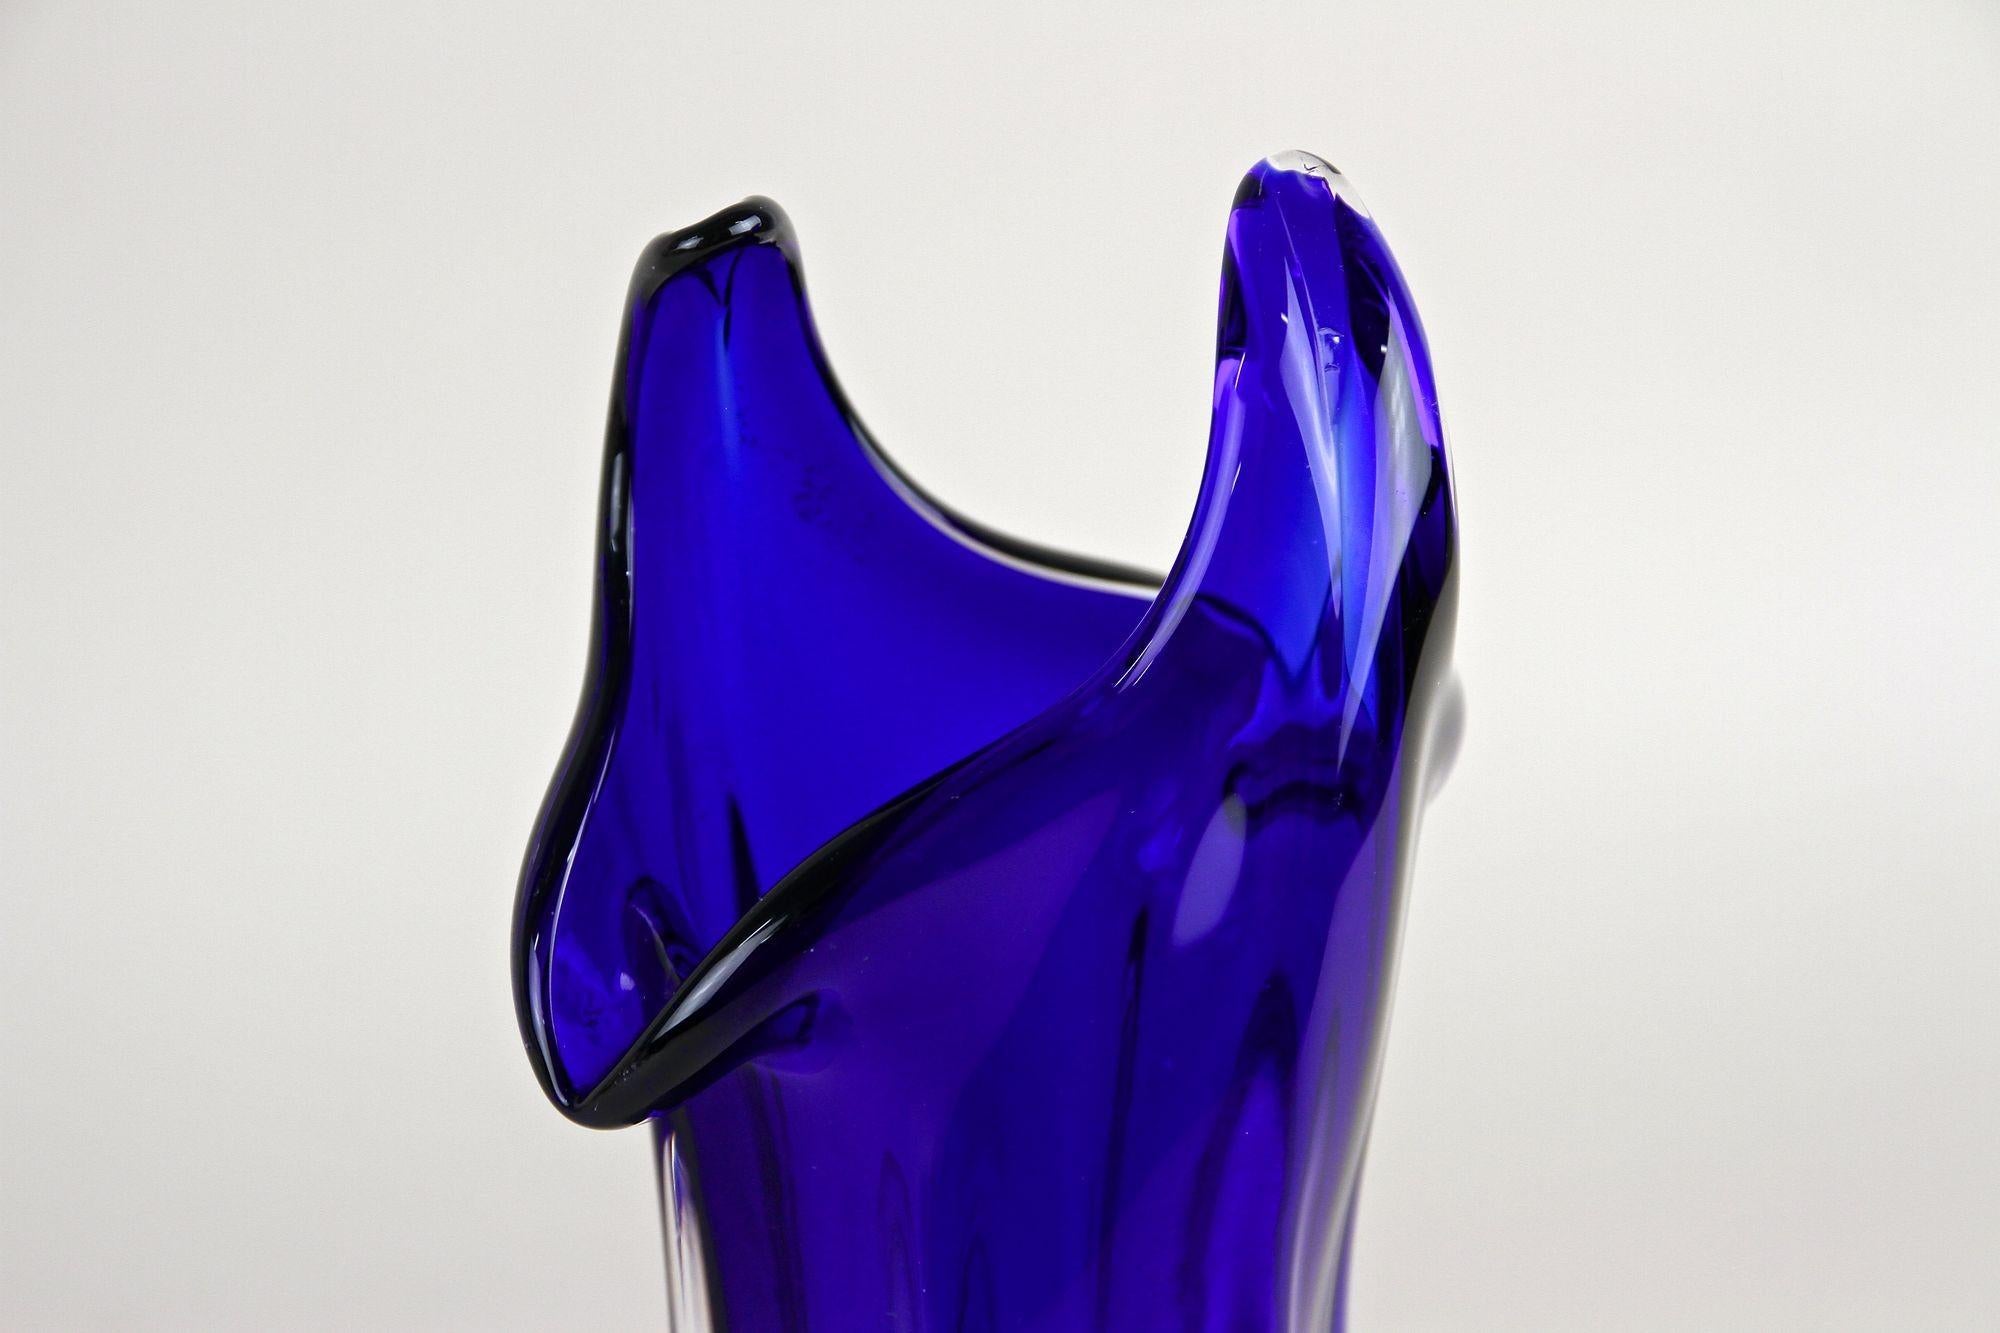 Fantastic dark blue modern Murano glass vase, handcrafted in the renowed workshops of Murano in Italy around 1970. This example of a late 20th century Murano vase shows best how creative the artist already were in the 1970s: an absolute timeless